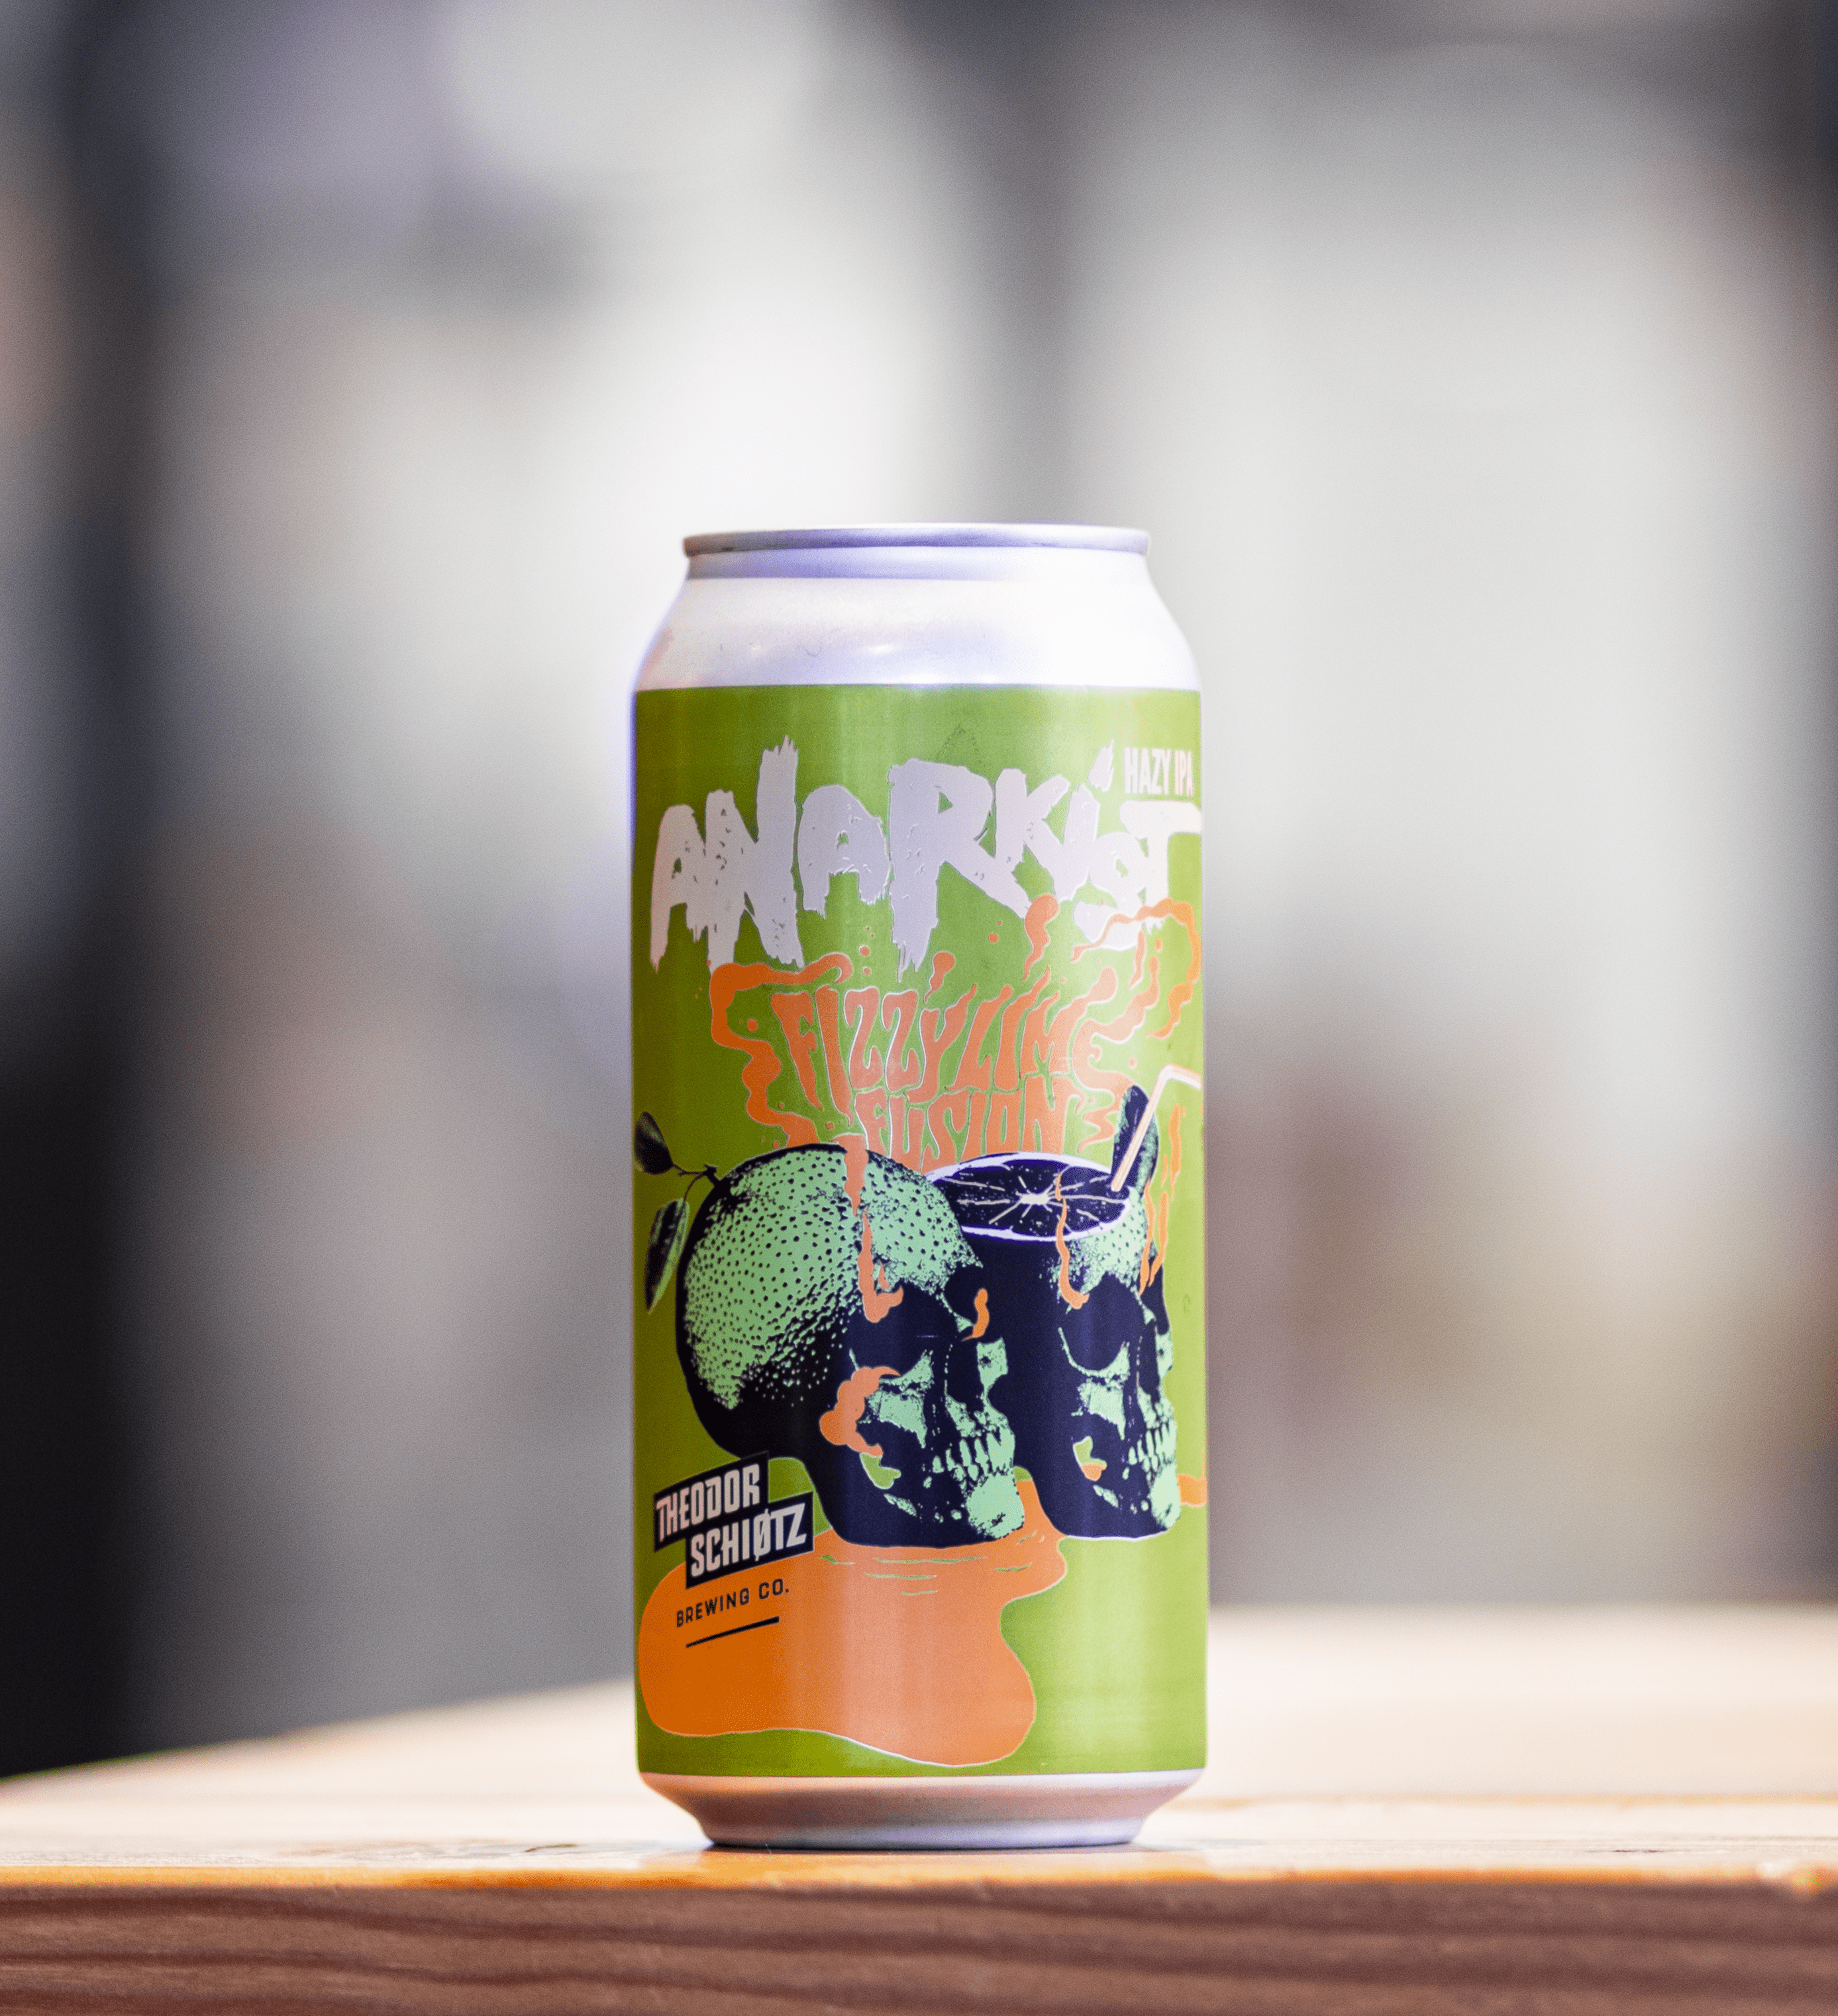 Anarkist Brewing: Fizzy Lime Fusion